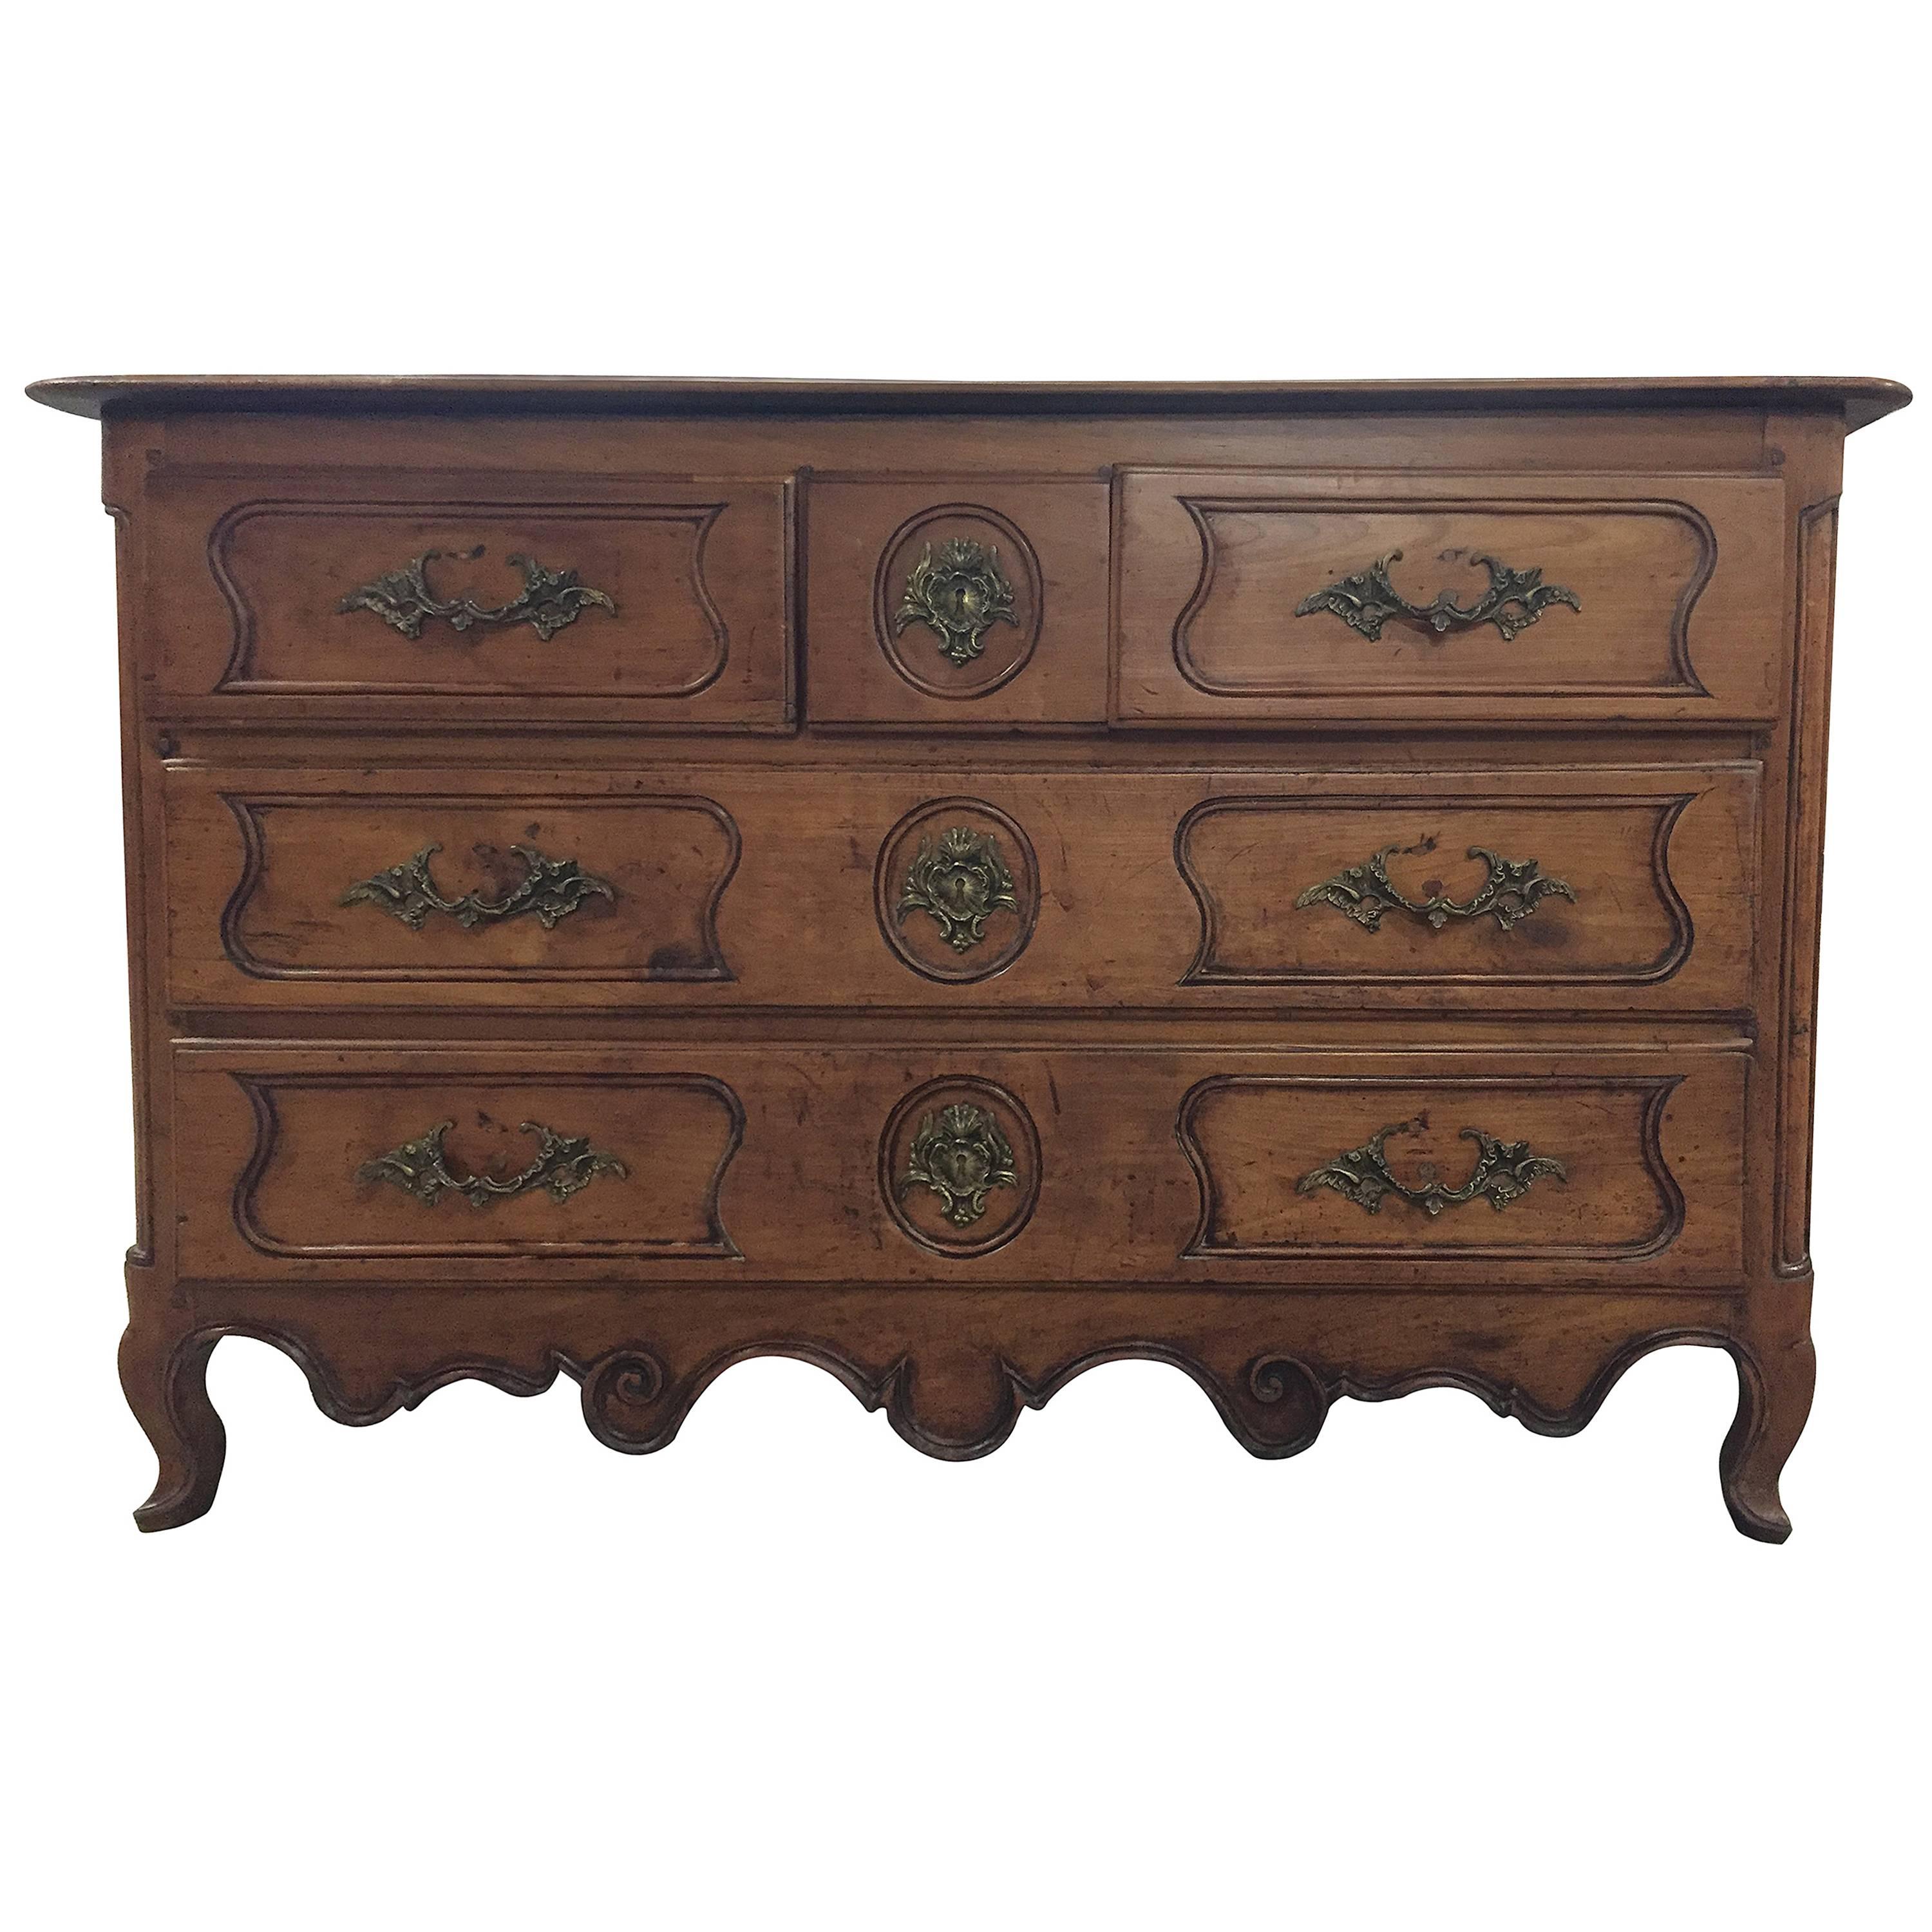 French Cherrywood Commode, circa 1880